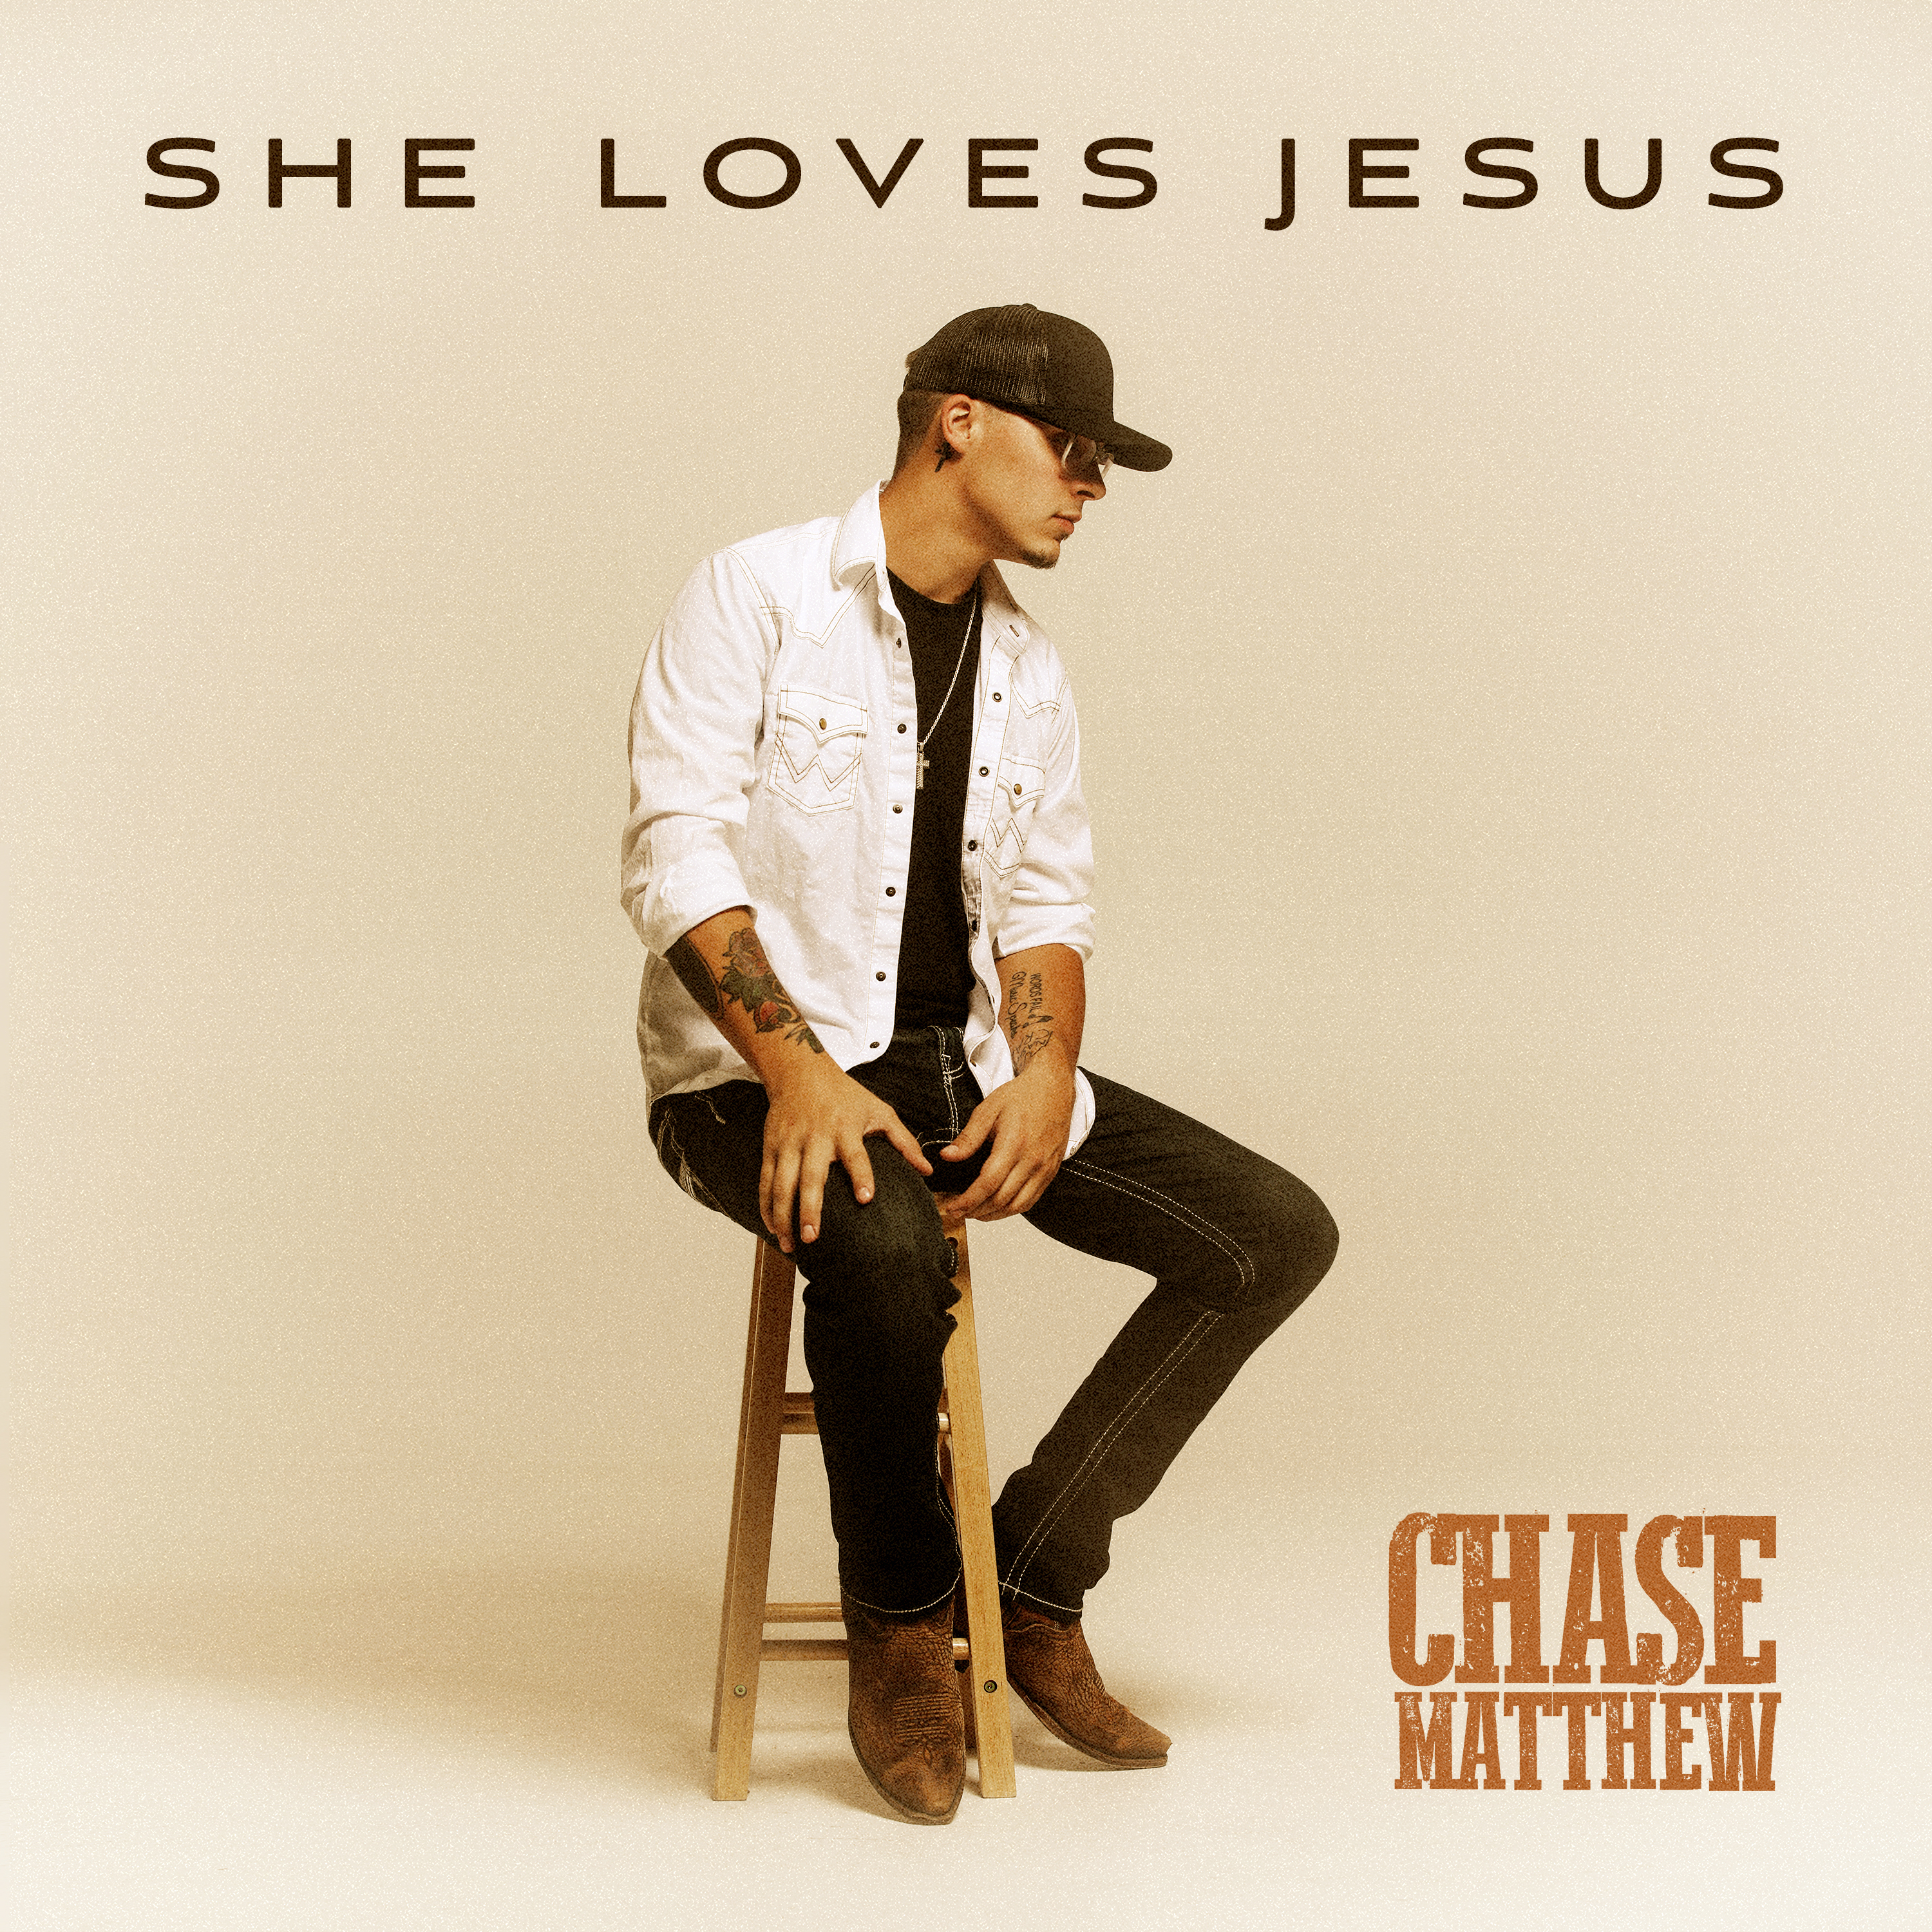 CHASE MATTHEW RELEASES HEARTFELT “SHE LOVES JESUS” OUT NOW (10.28)